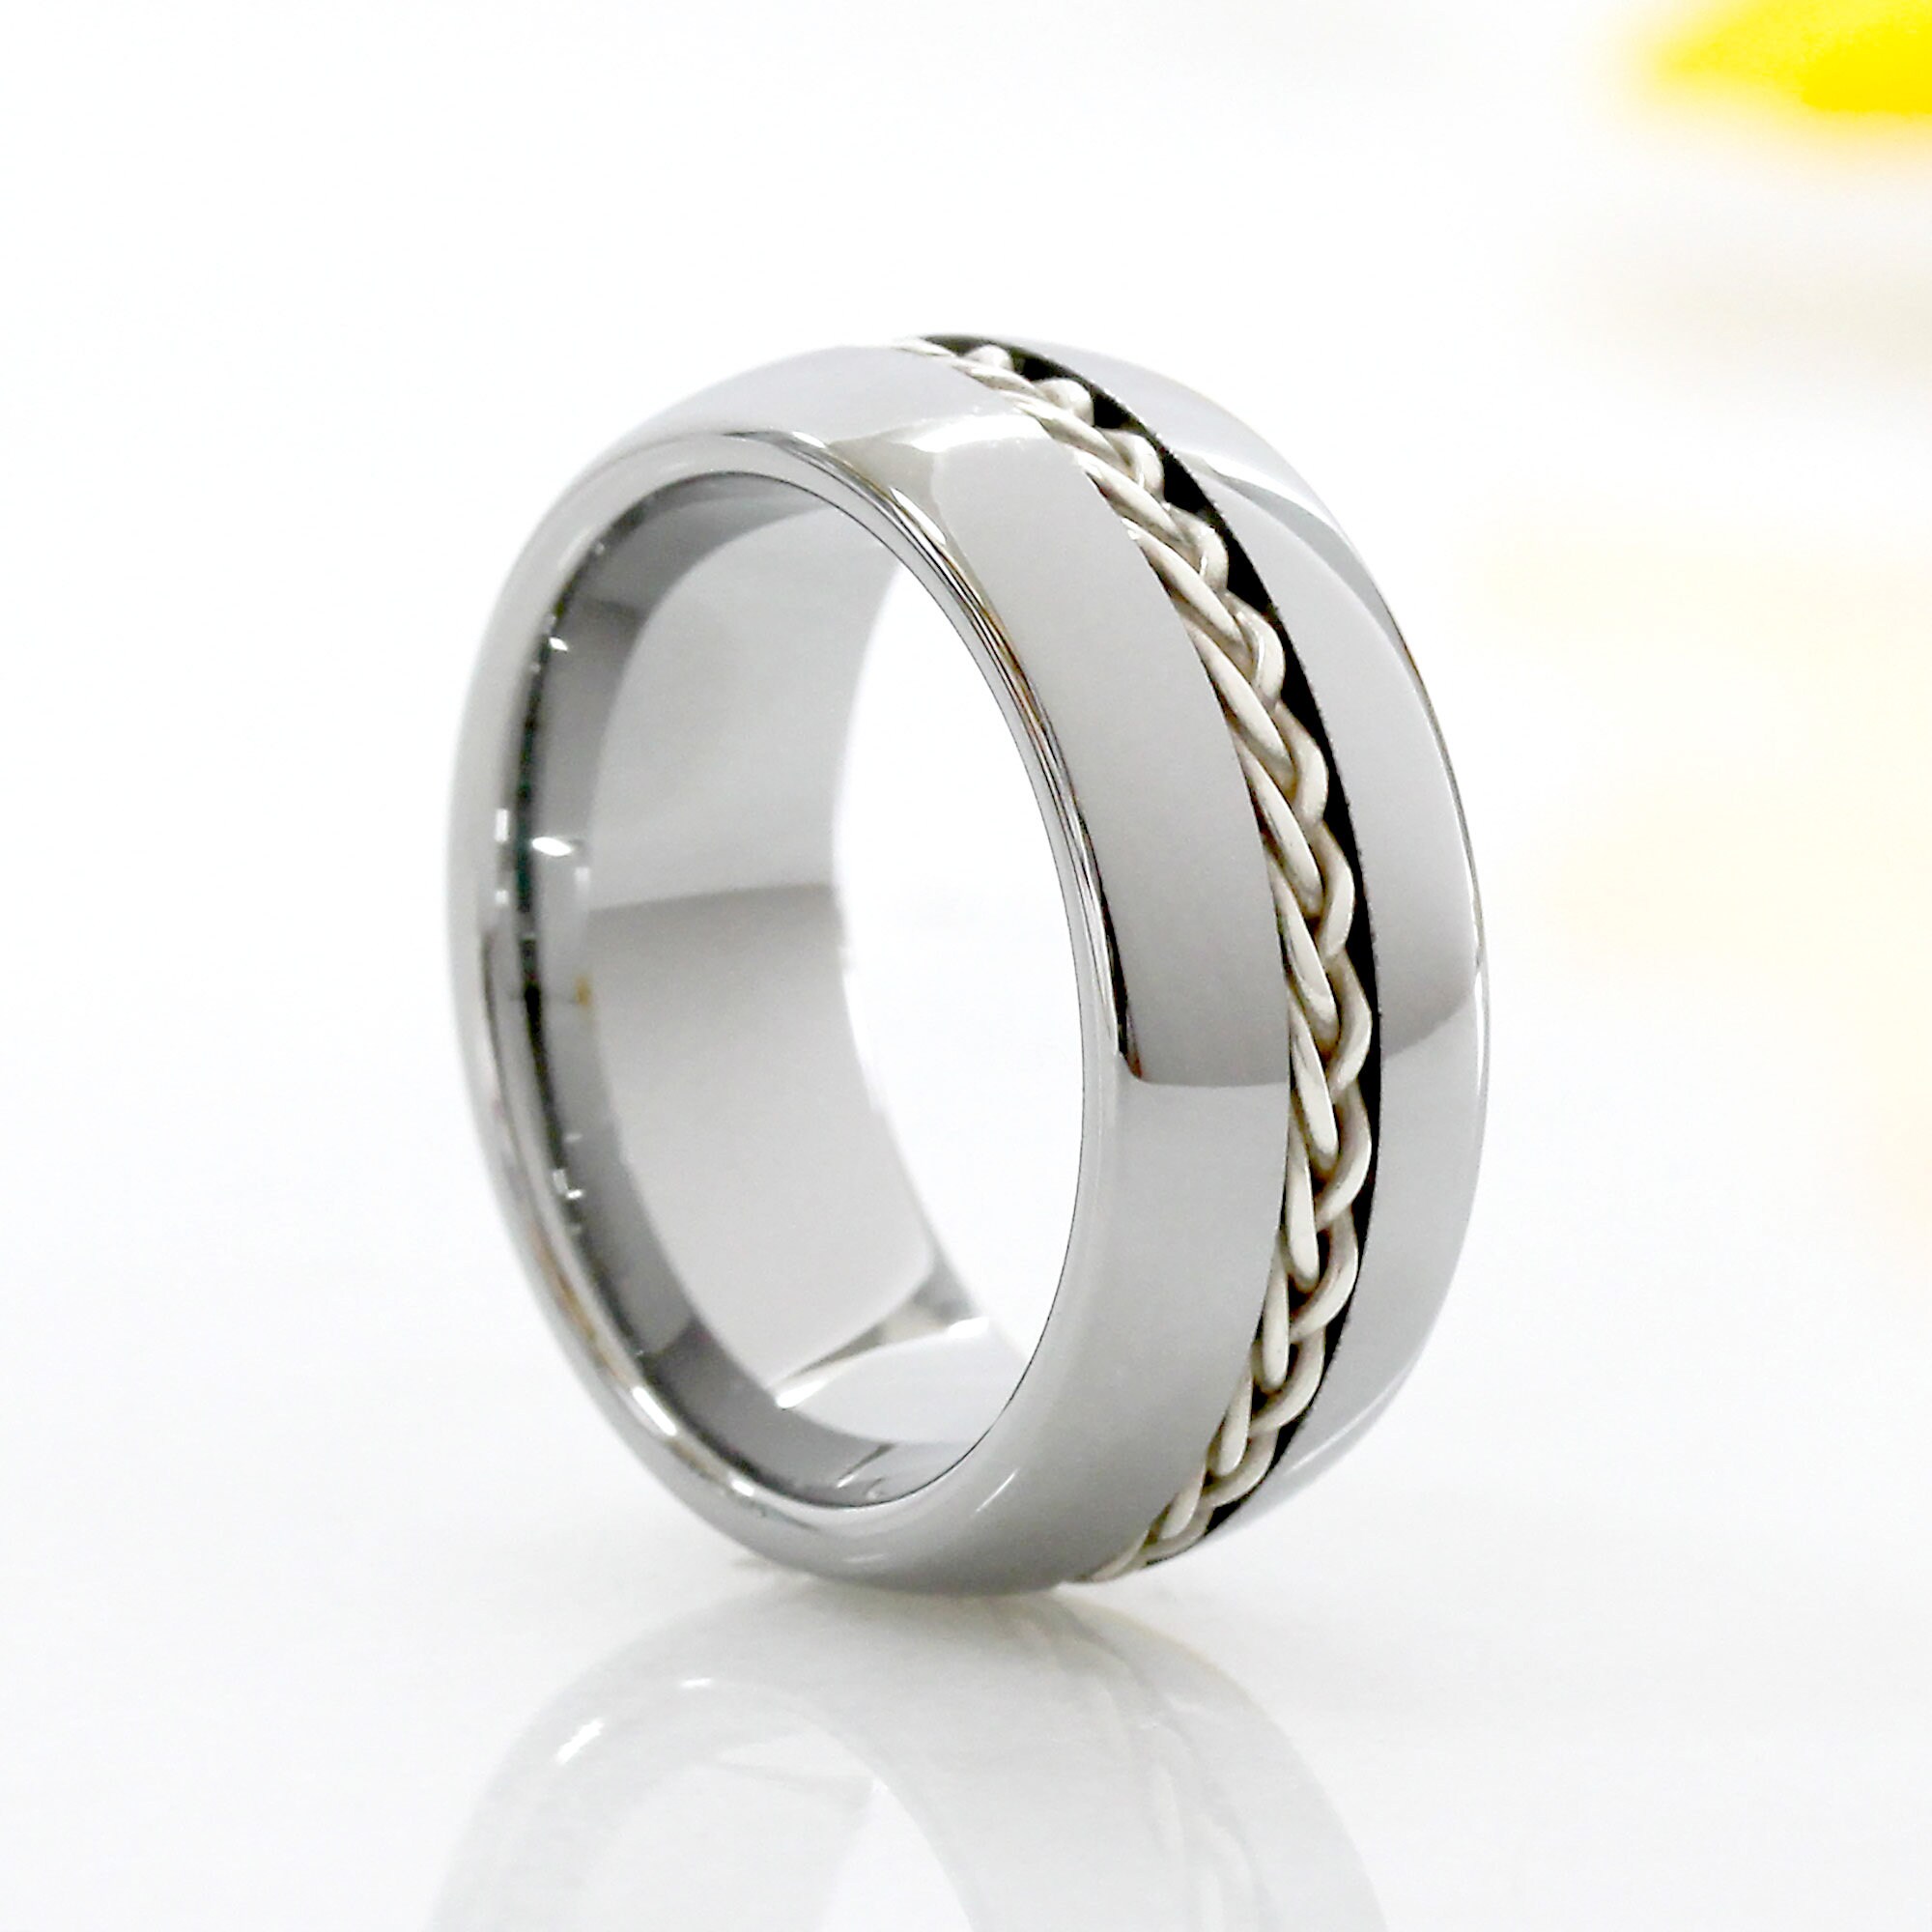 Mens Carbide Tungsten Wedding Ring Grooved with Braided Sterling Silver  Insert - 8mm